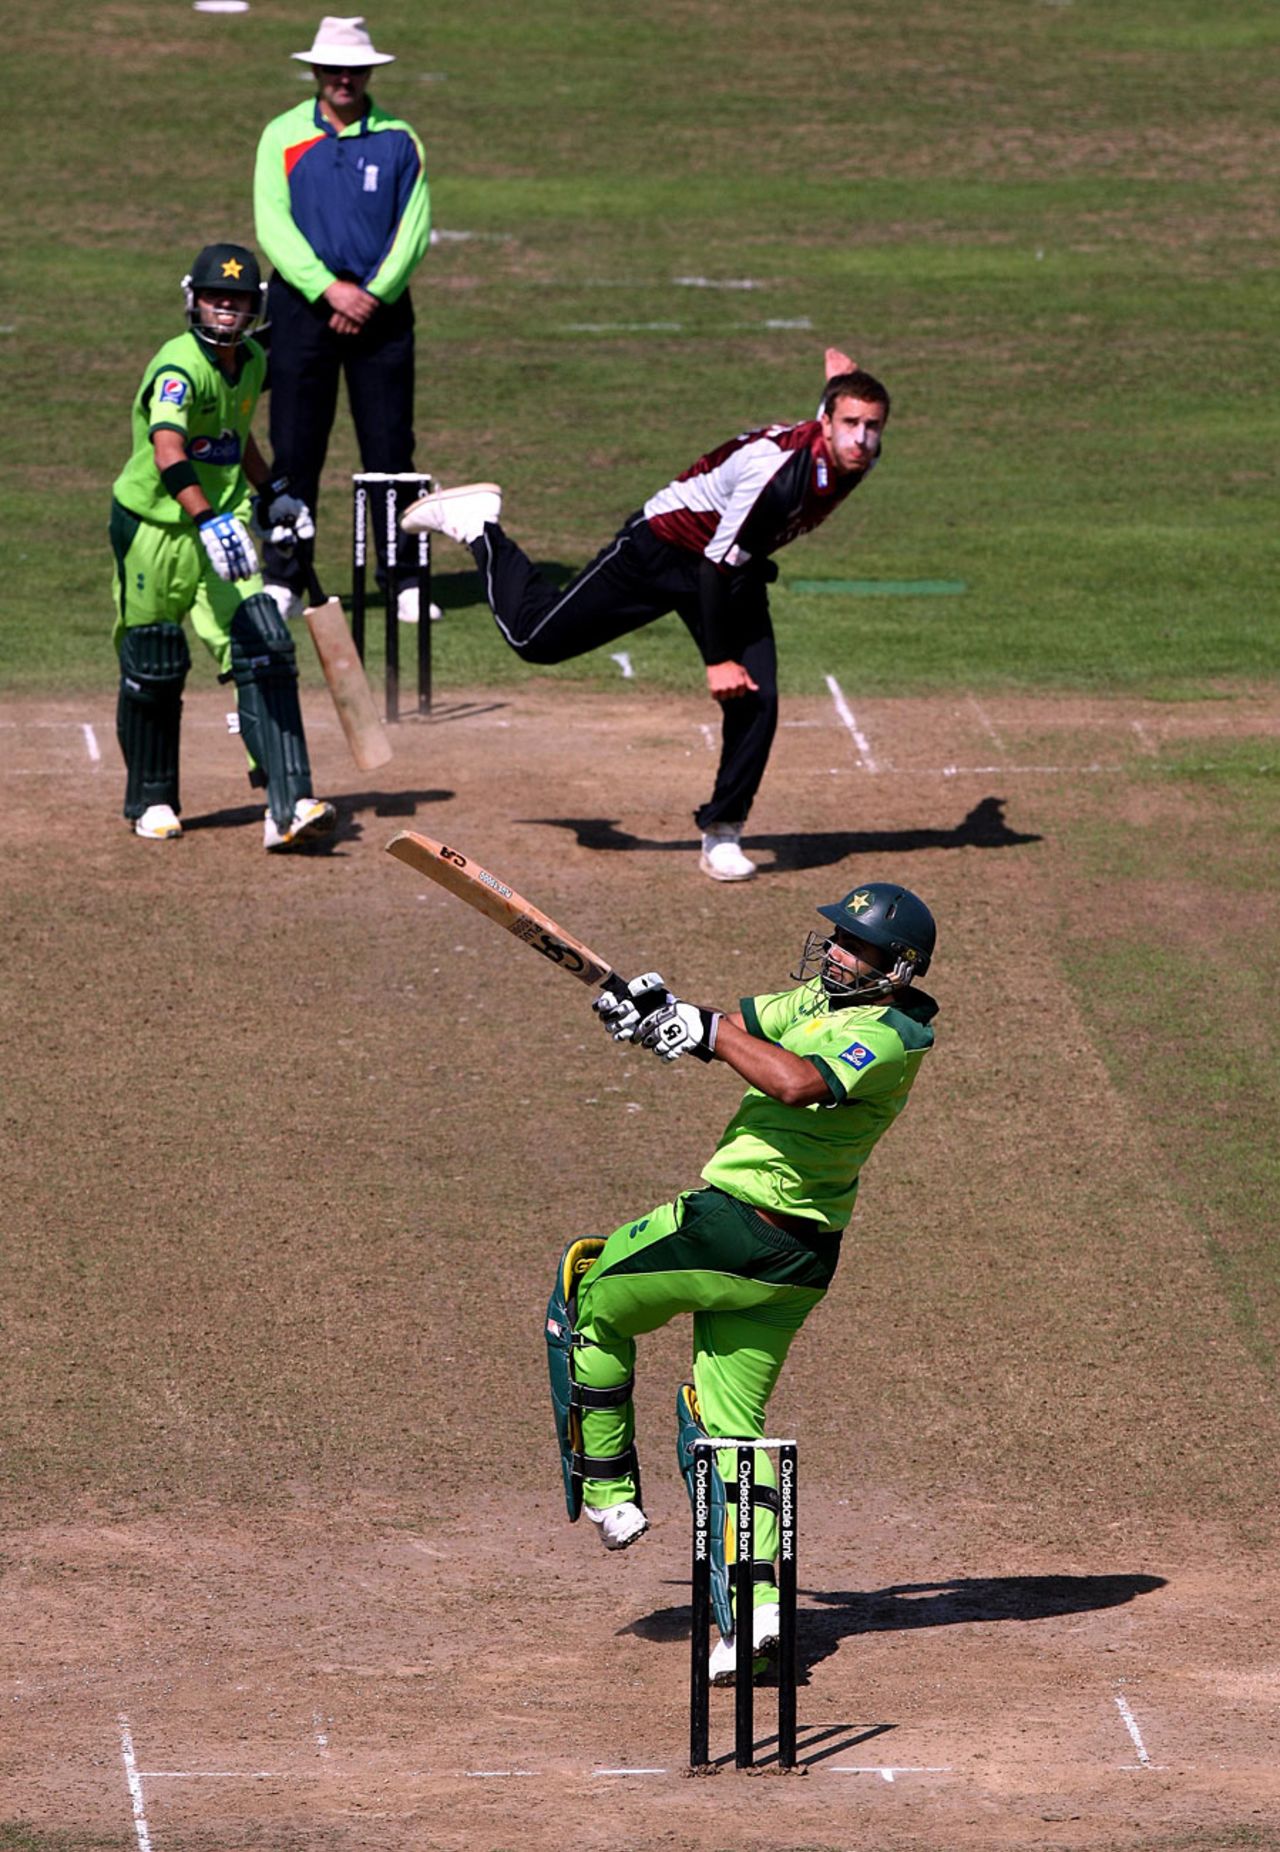 Shahzaib Hasan hit 10 fours and two sixes in his 120-ball innings, Somerset v Pakistanis, Tour Match, Taunton, September 2 2010